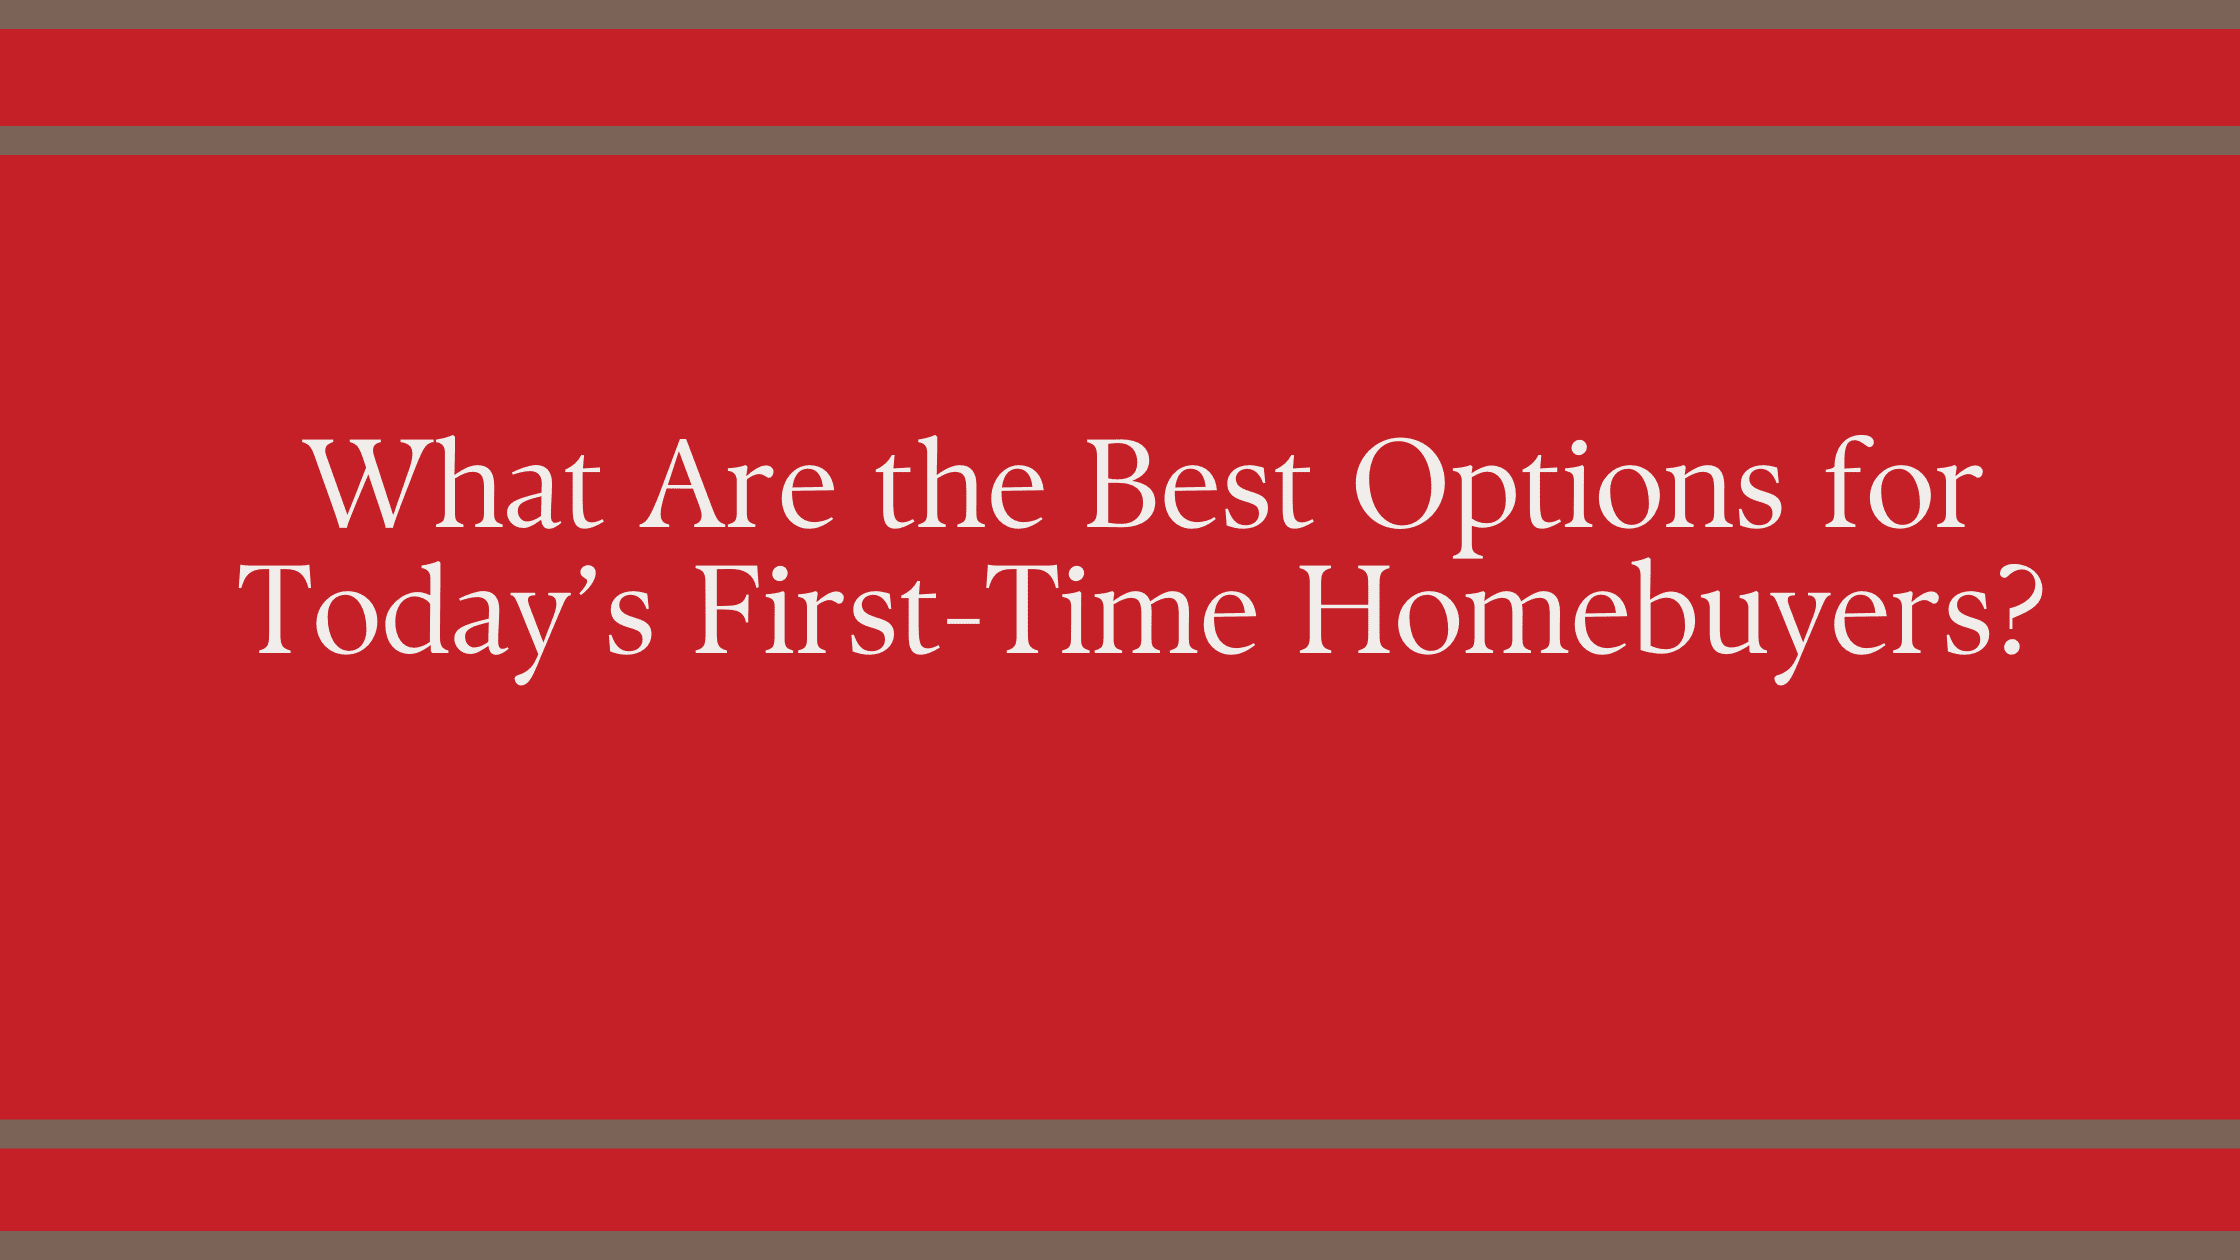 What Are the Best Options for Today’s First-Time Homebuyers